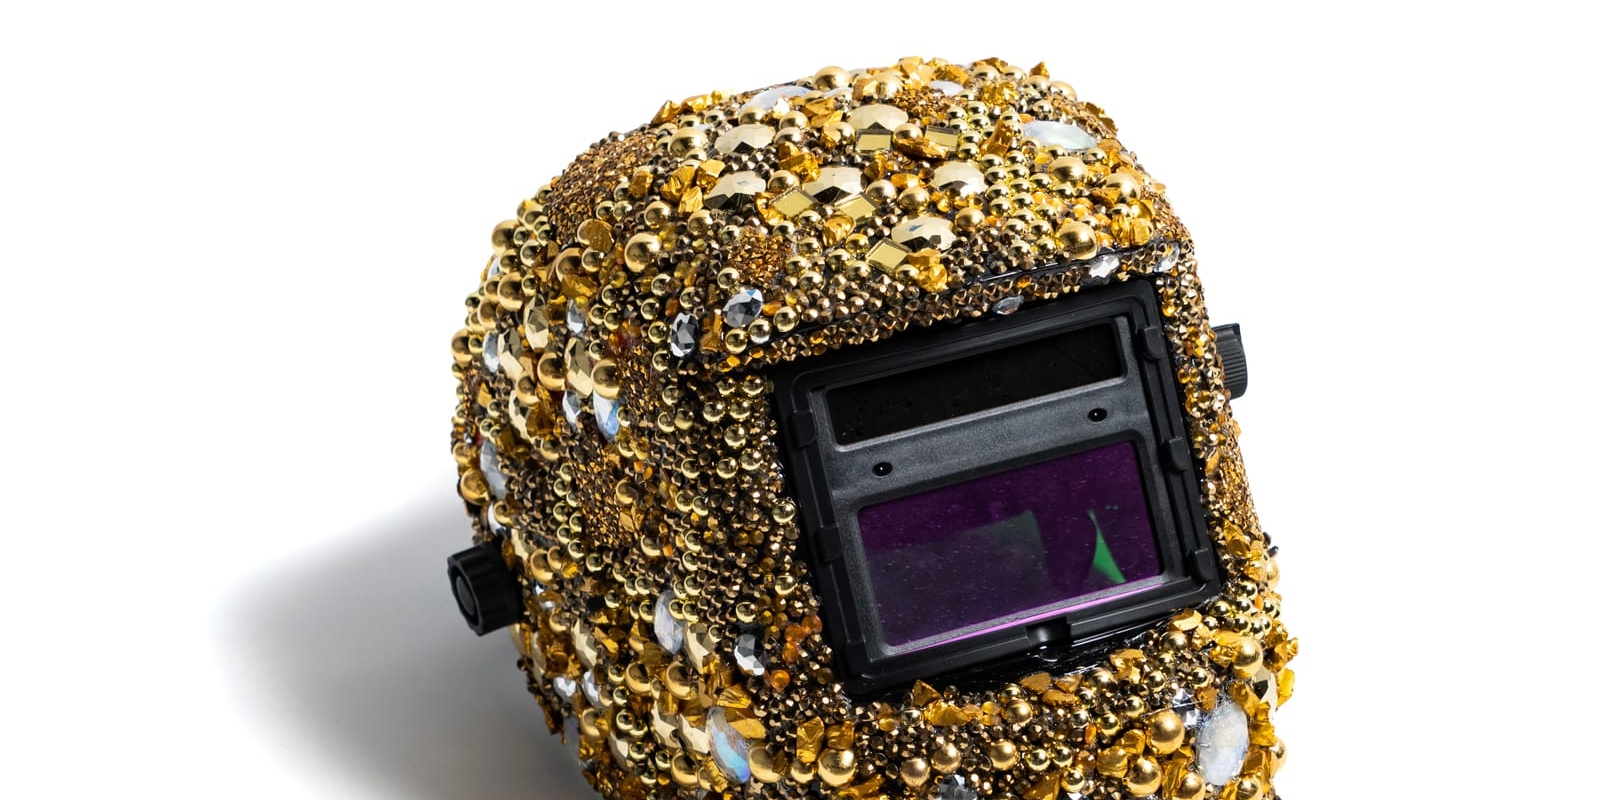 A welding helmet covered in gold jewels